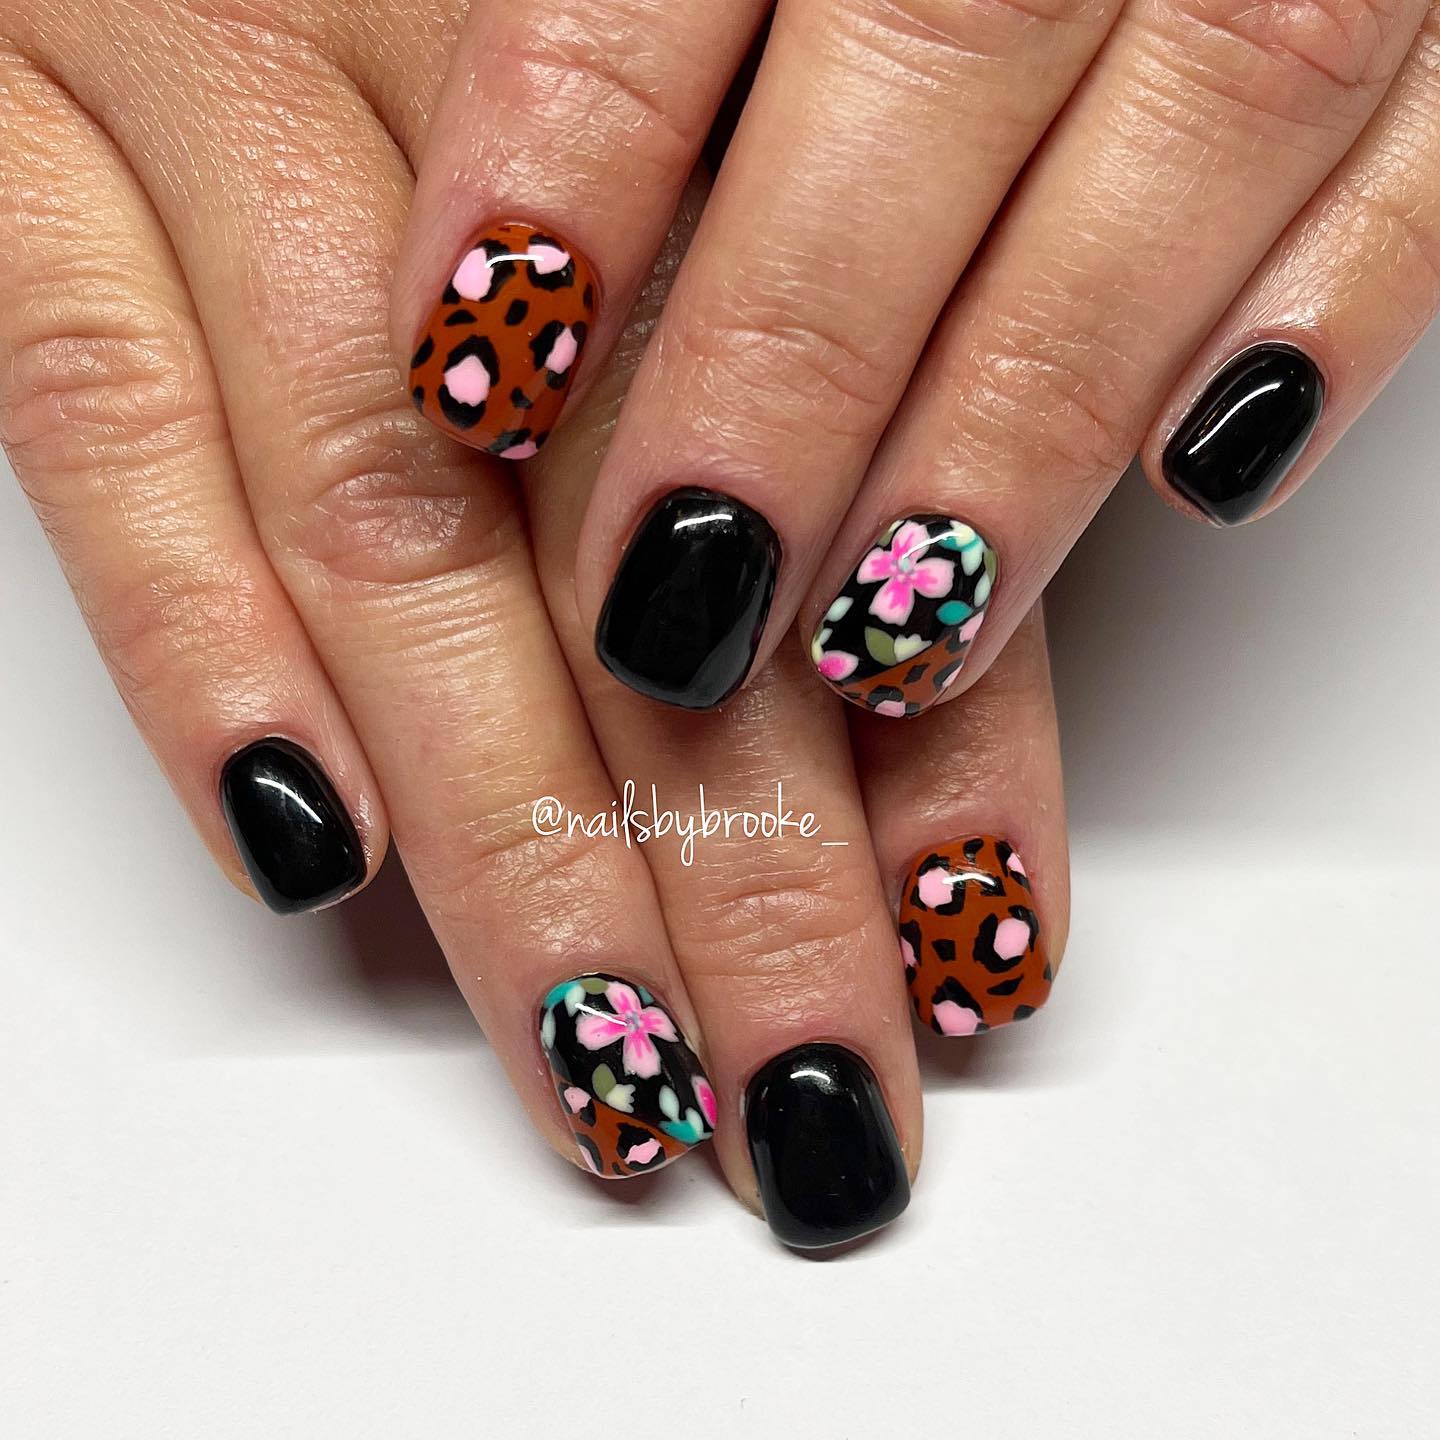 Black Nails With Colorful Floral Patterns